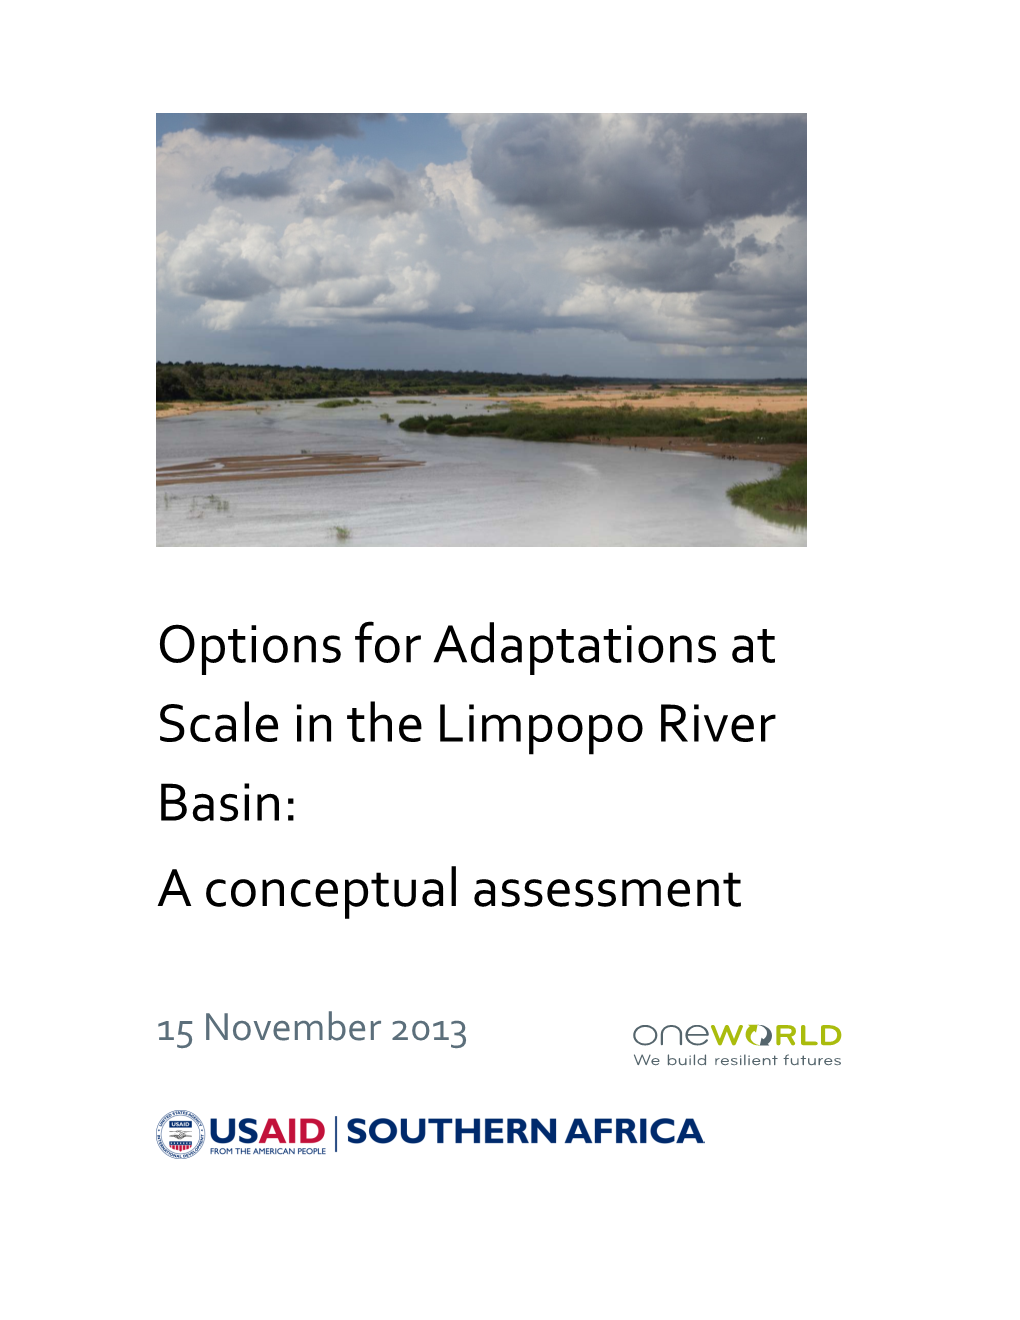 Options for Adaptations at Scale in the Limpopo River Basin: a Conceptual Assessment